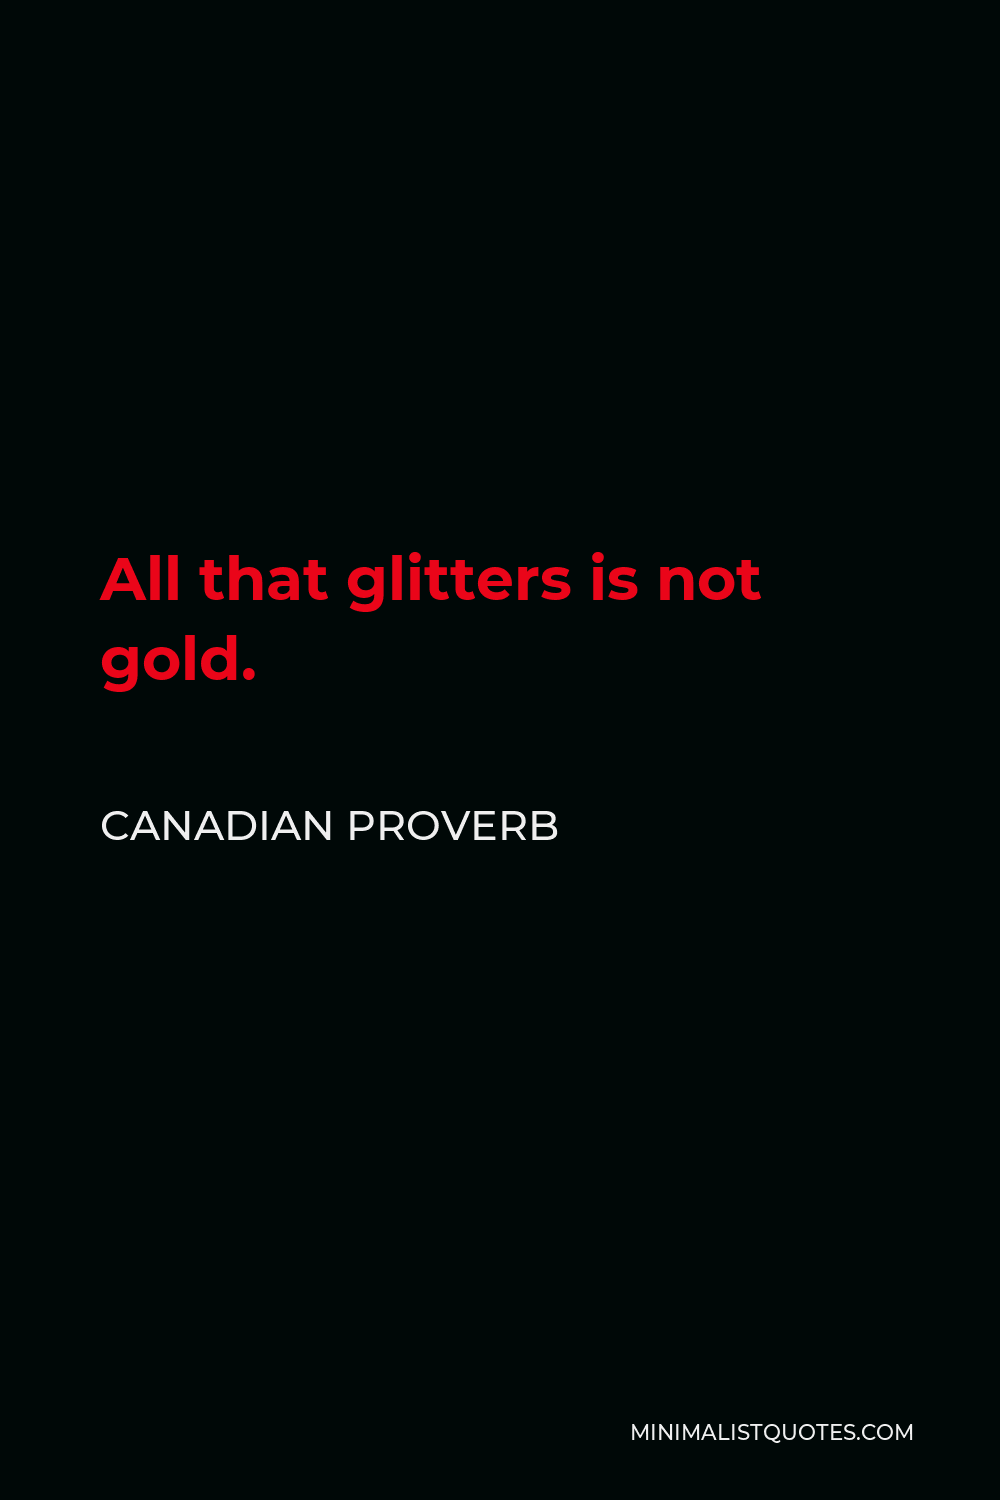 Canadian Proverb Quote - All that glitters is not gold.